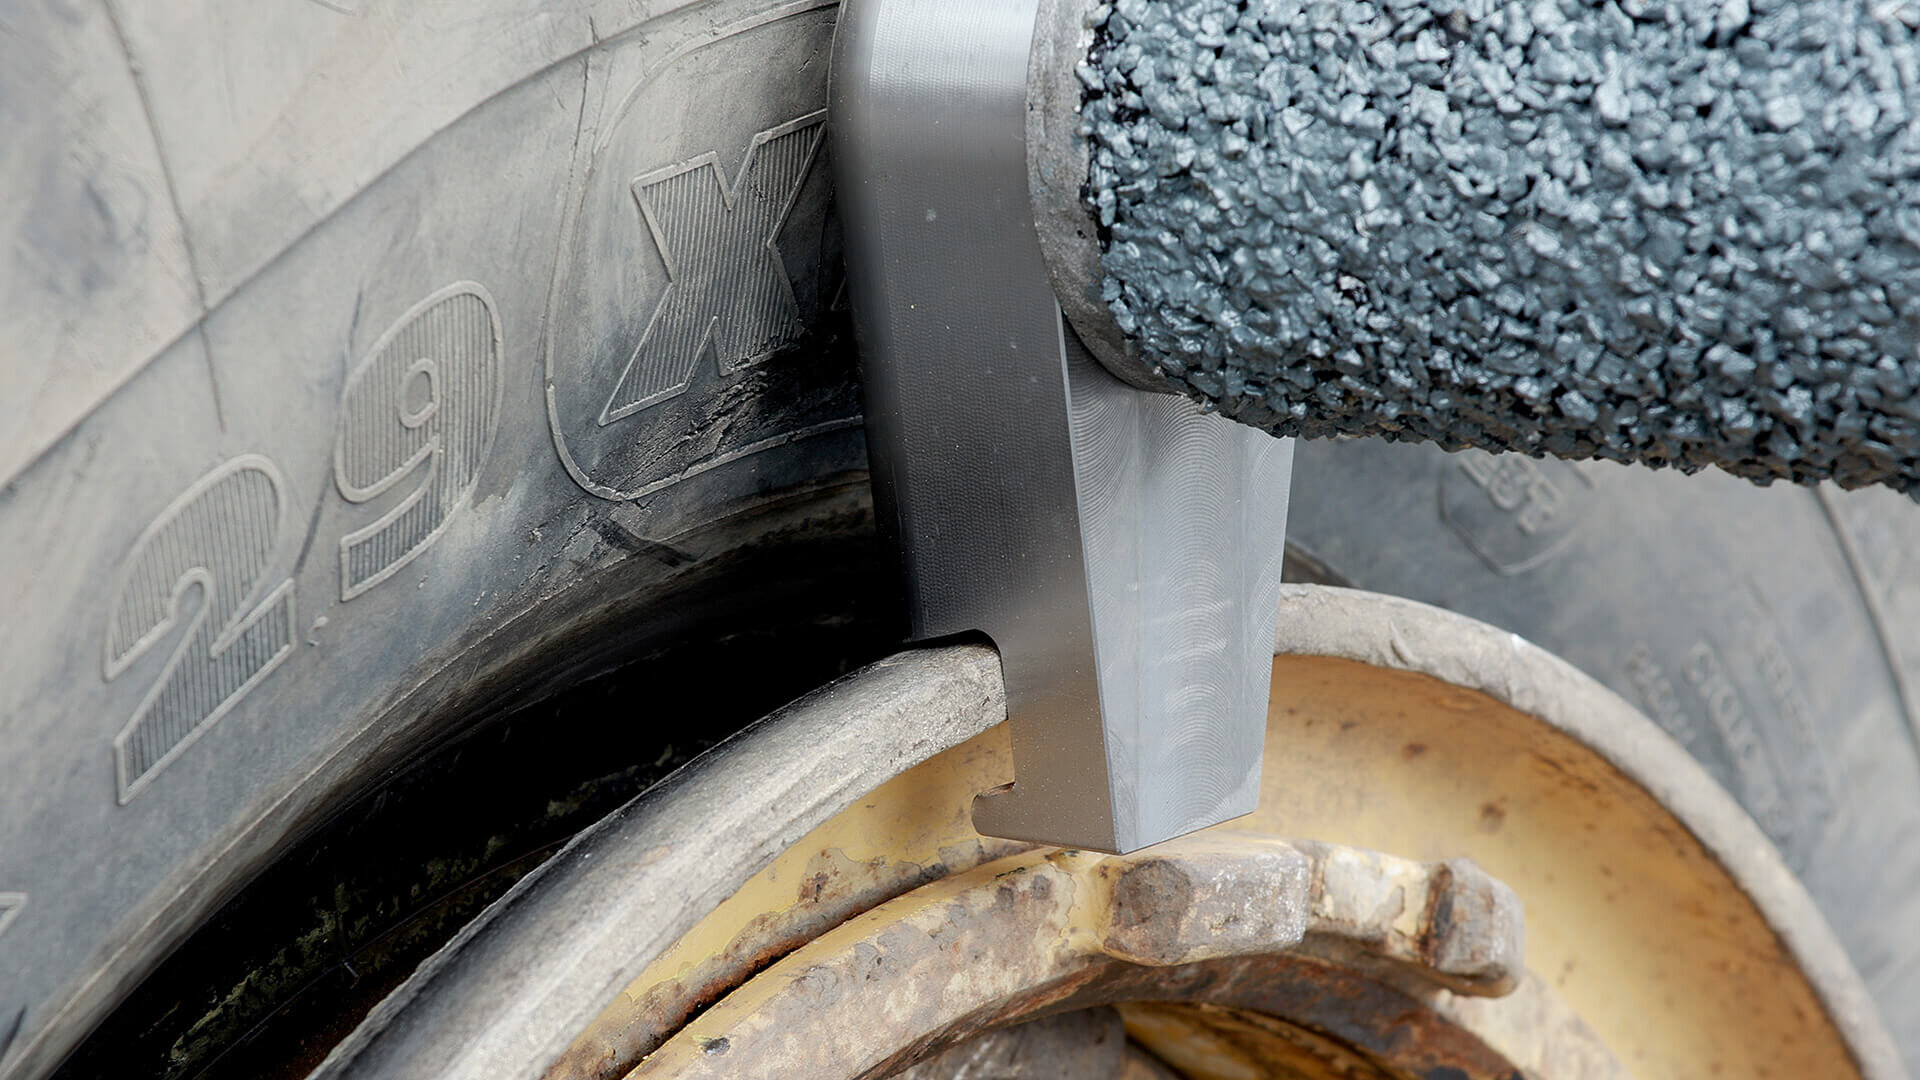 Efficient handling of tyre rings using ring handling tools from Just Easy Tools